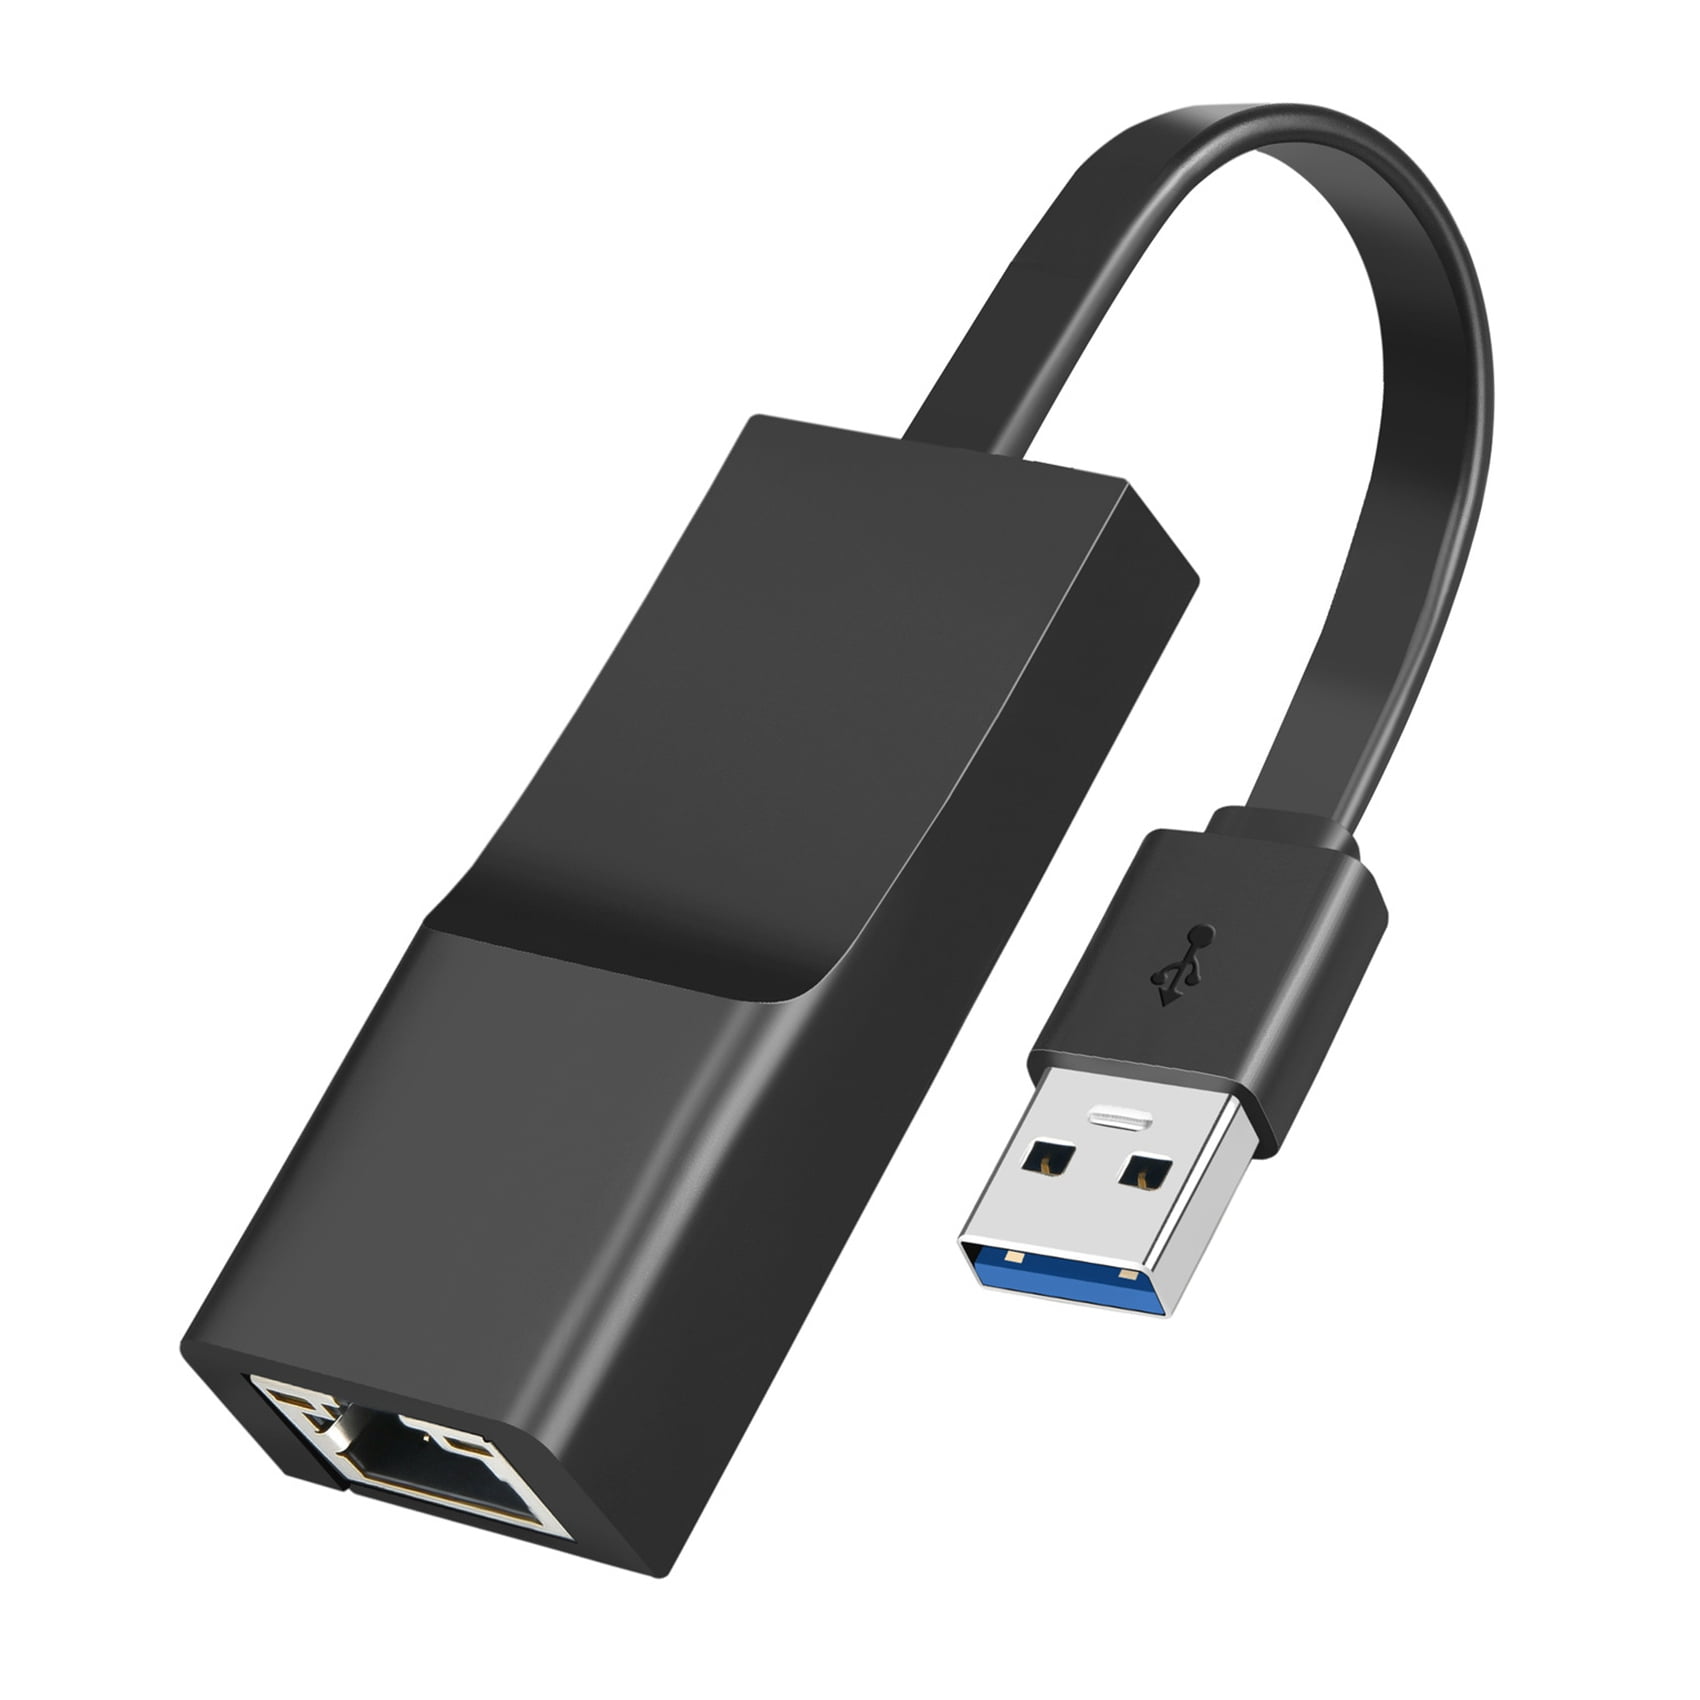 USB 3.0 Ethernet Adapter Network Card, USB 3.0 to RJ45 2500Mbps LAN Internet Cable for Windows/ OS, - Walmart.com